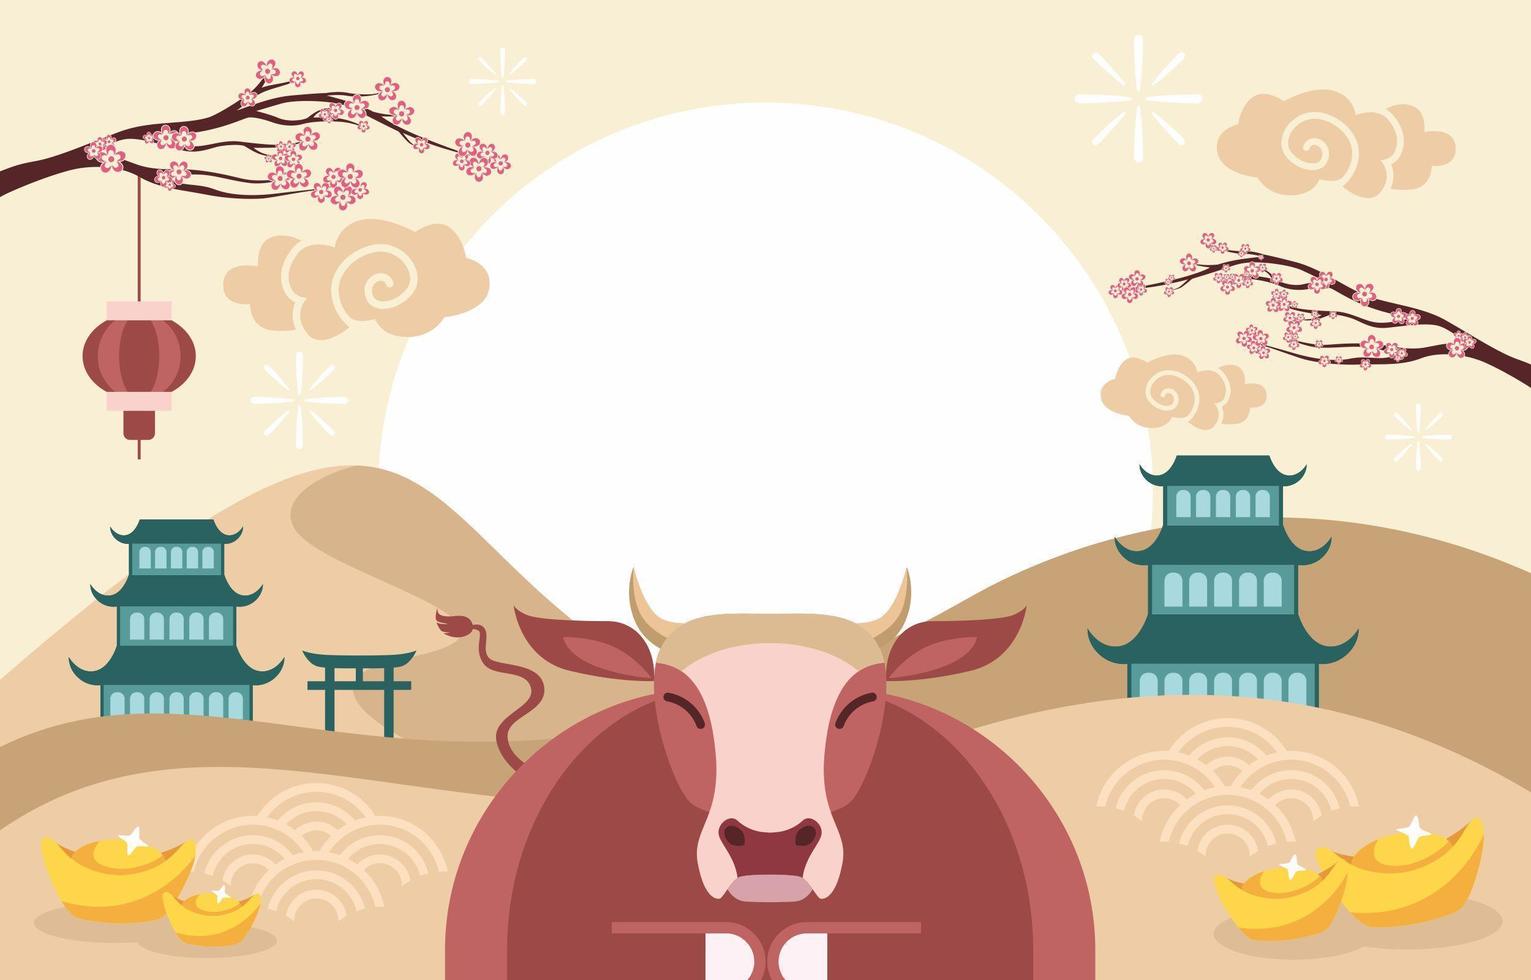 Gong Xi Fa Cai Background for Chinese New Year vector